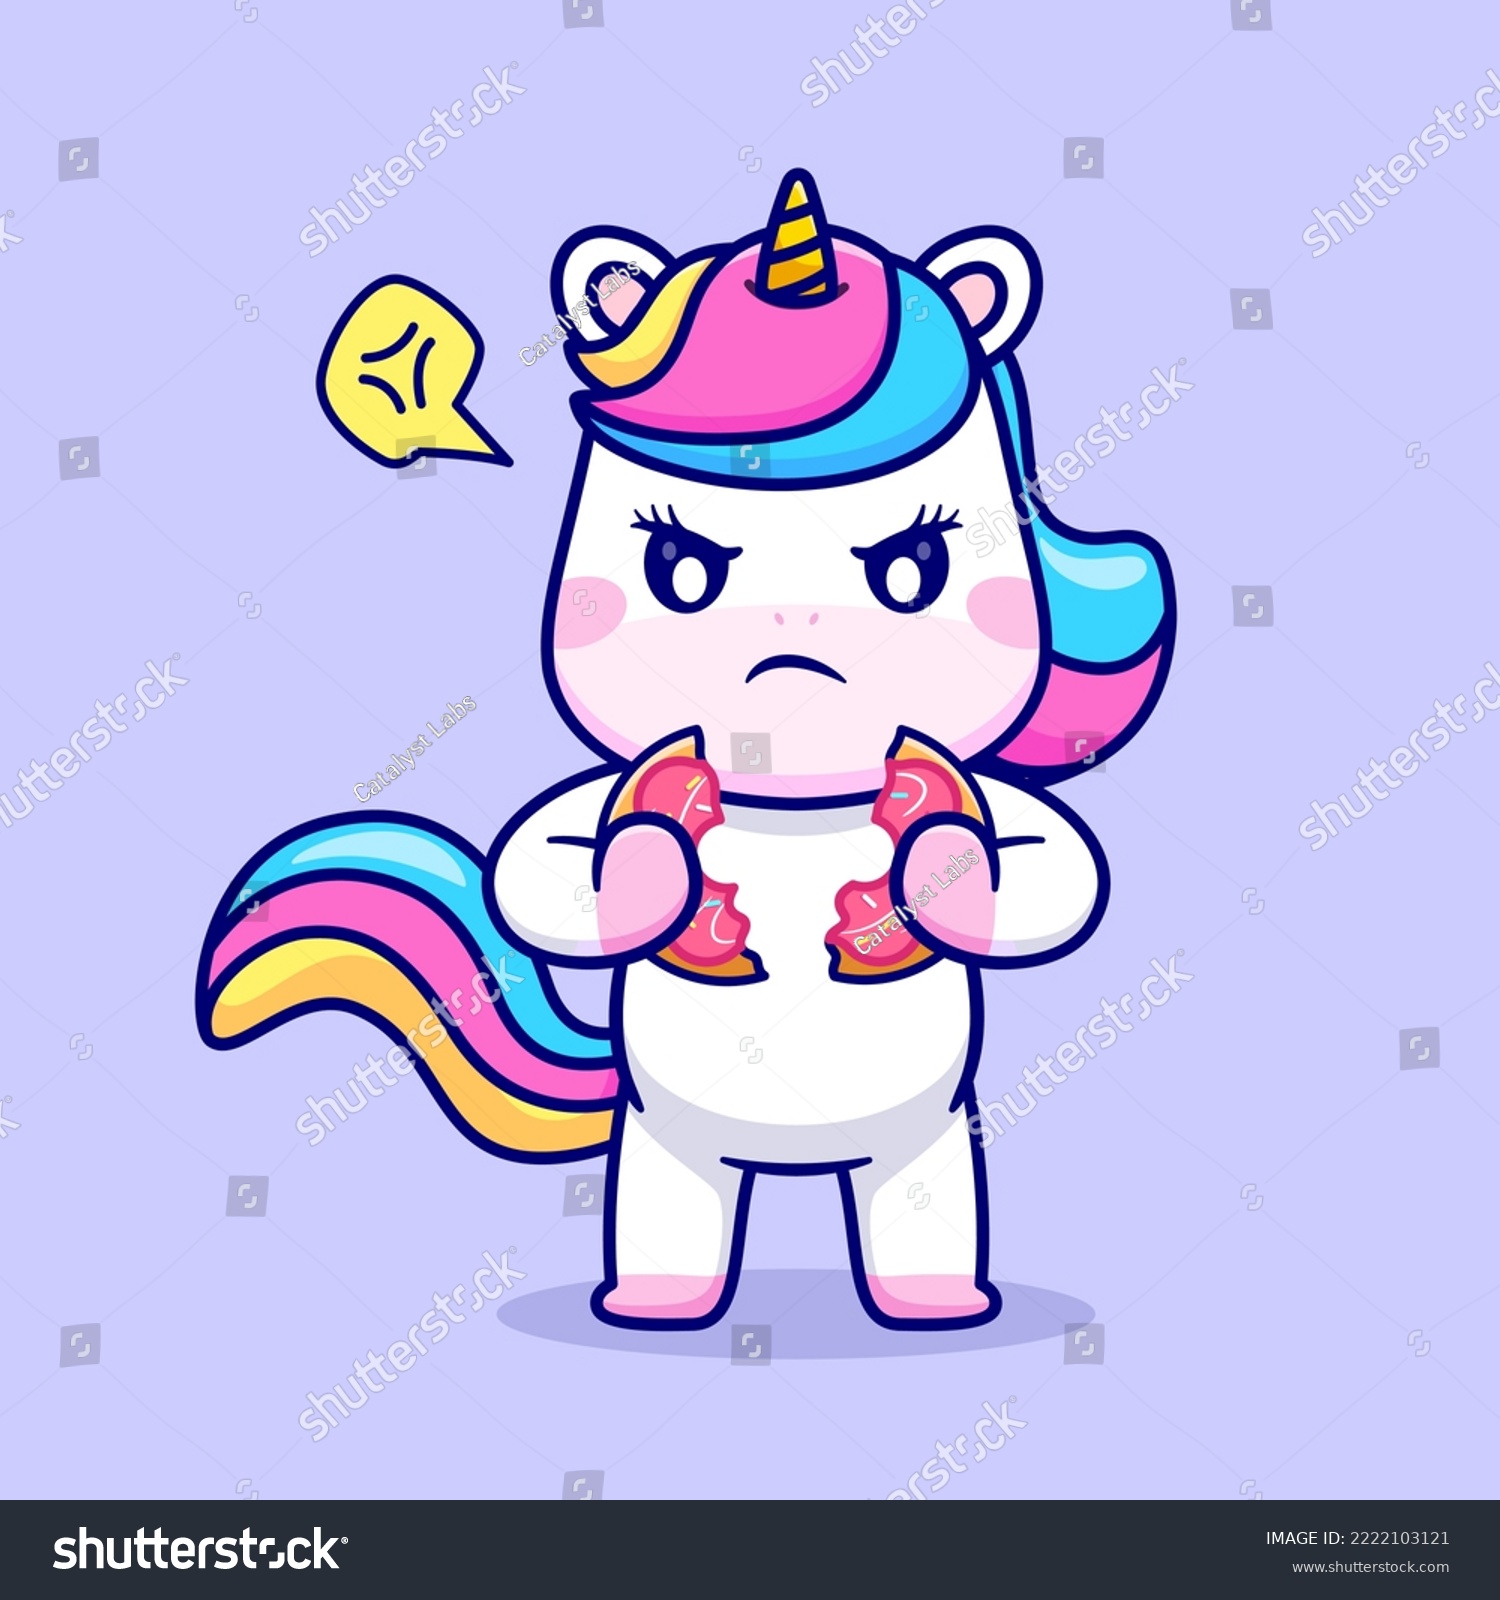 SVG of Cute Angry Unicorn Breaking Donut Cartoon Vector Icon Illustration. Animal Food Icon Concept Isolated Premium Vector. Flat Cartoon Style svg